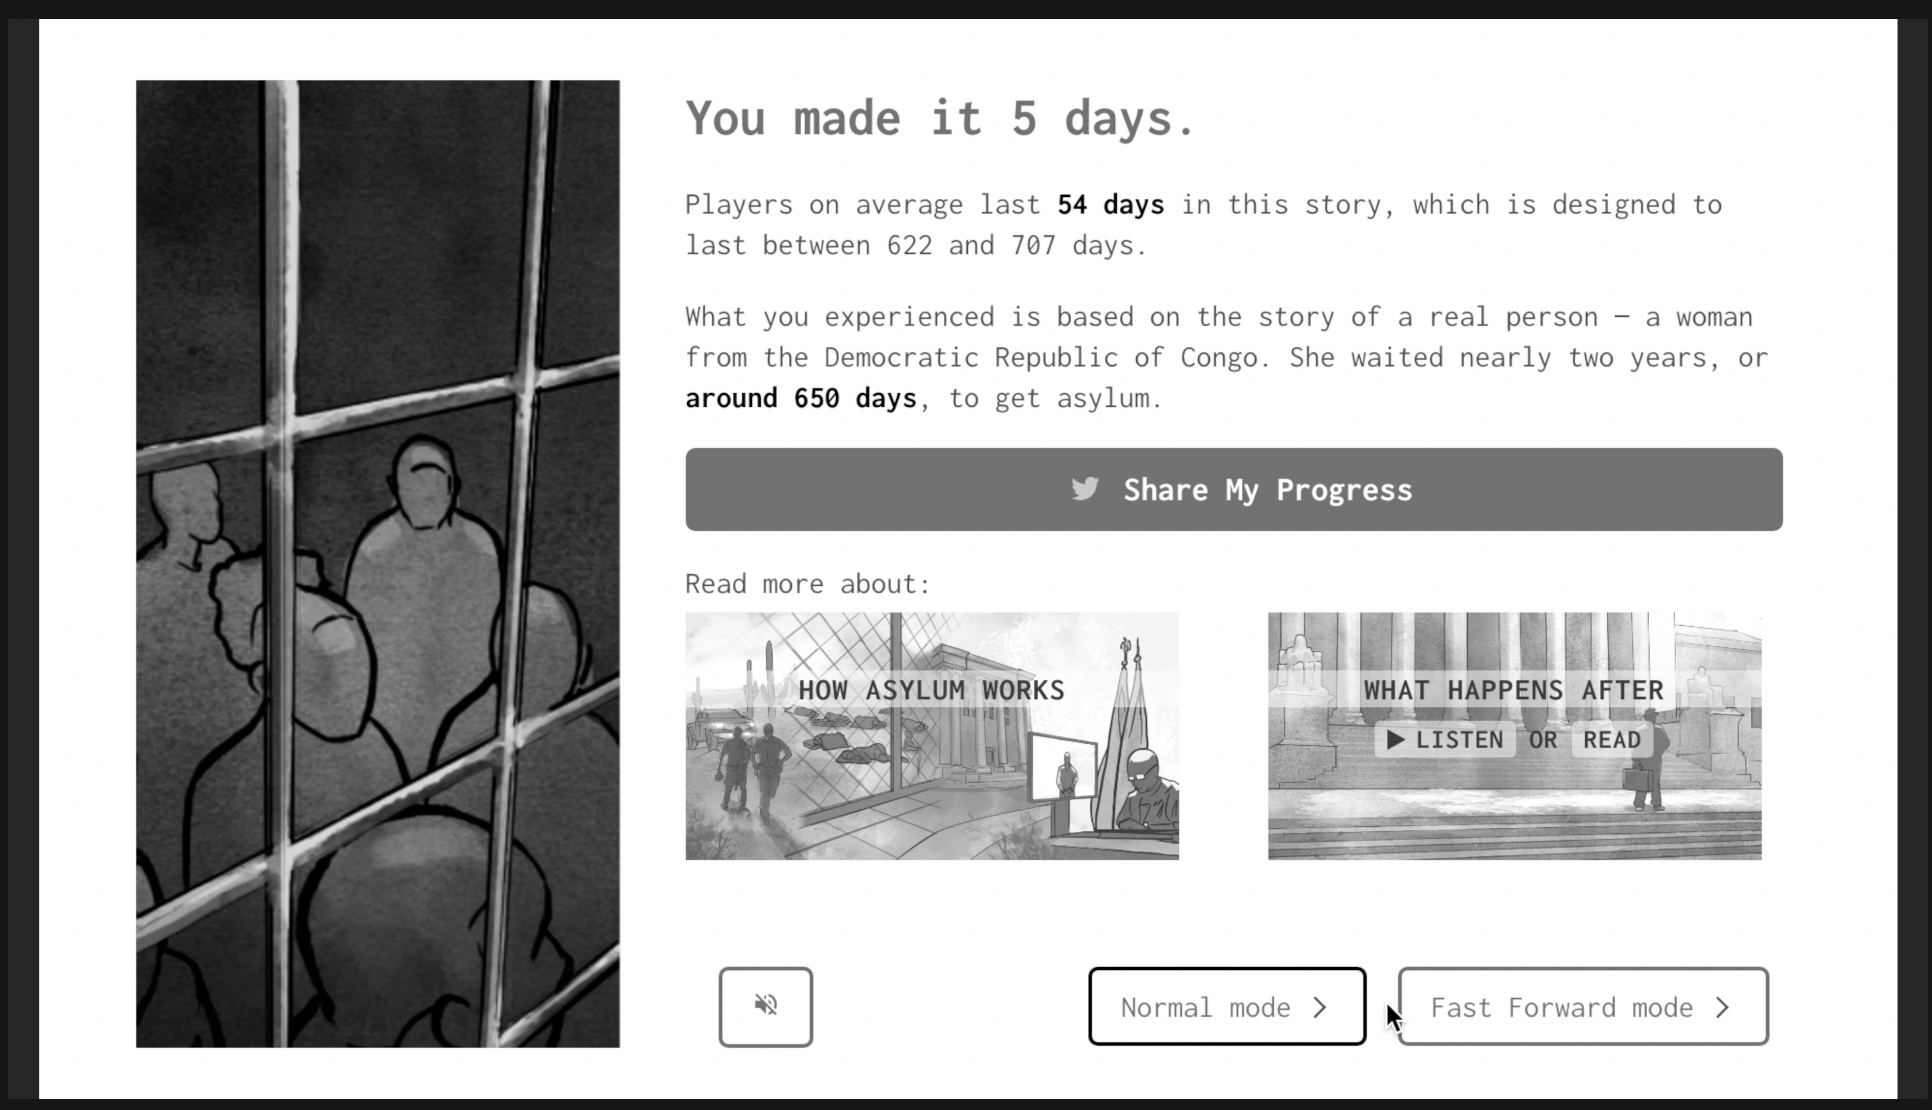 Games for News: Inviting readers to participate in the story